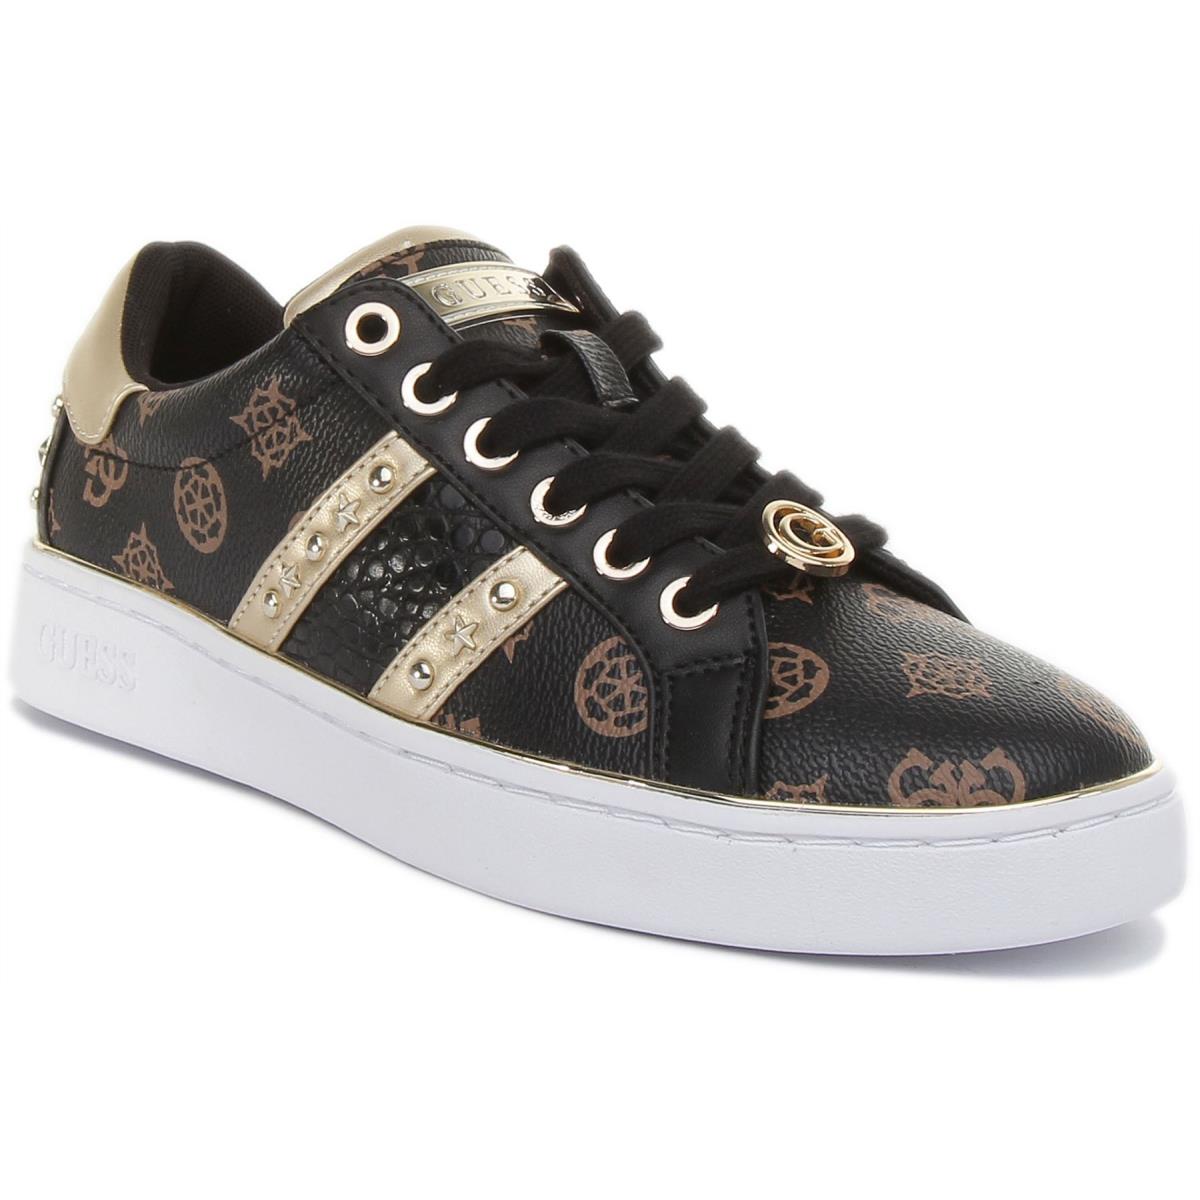 Guess Womens Bevlee Lace Up Trainers In Black Gold Colour Size US 4 - 9 BLACK GOLD